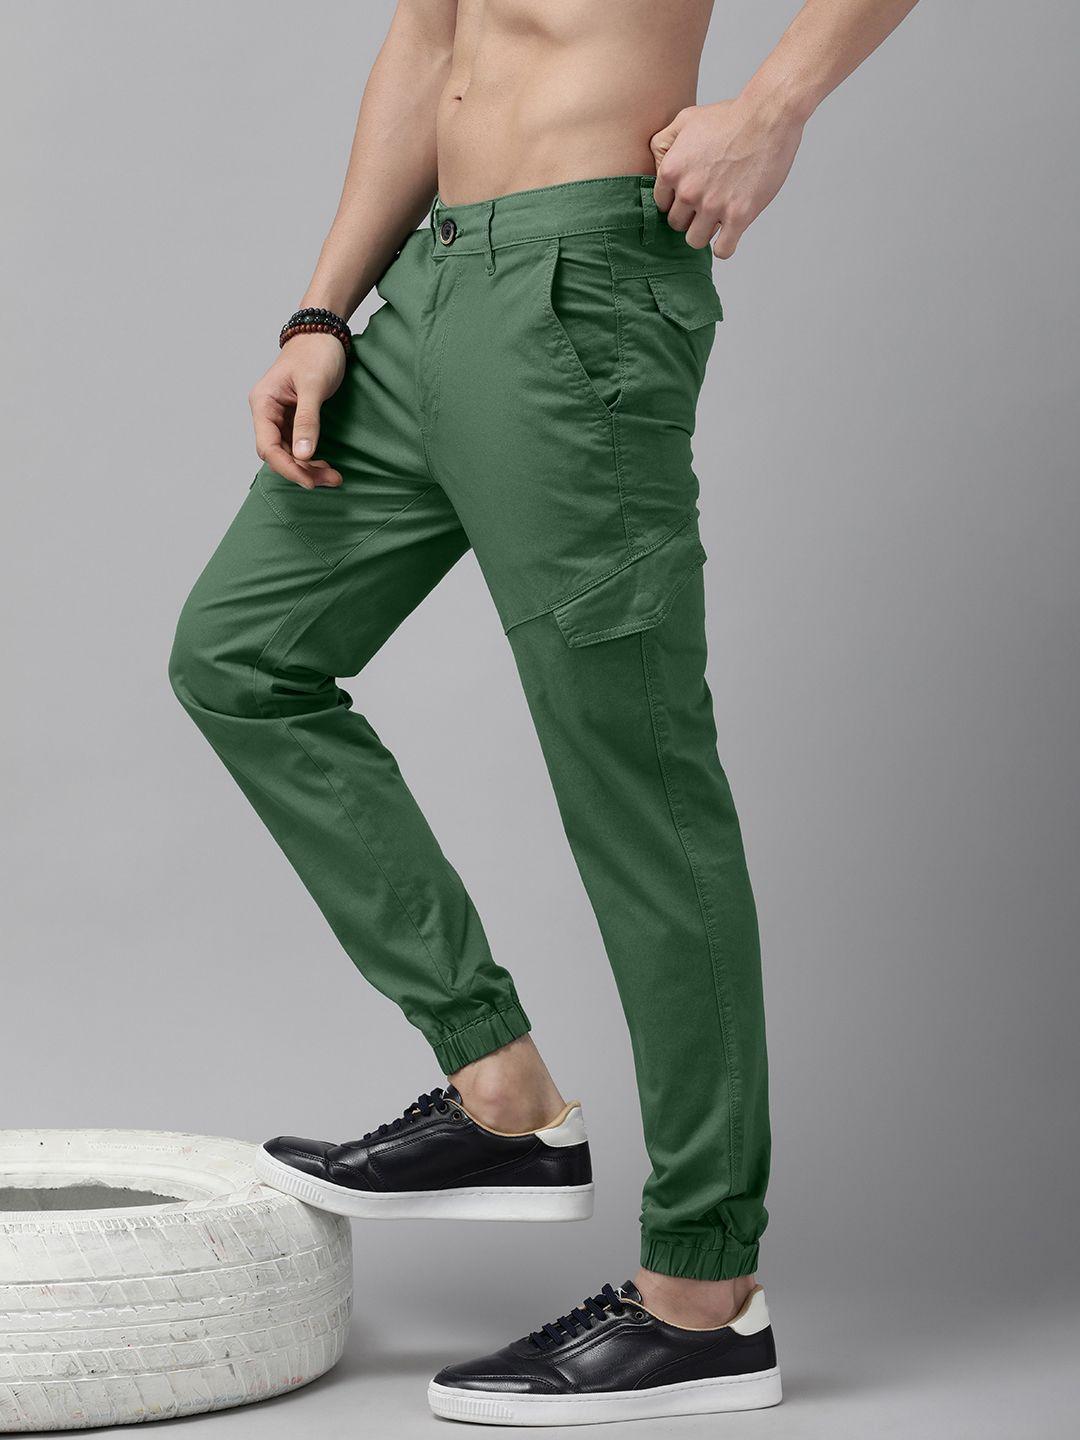 the roadster lifestyle co men green solid mid-rise regular fit joggers trousers